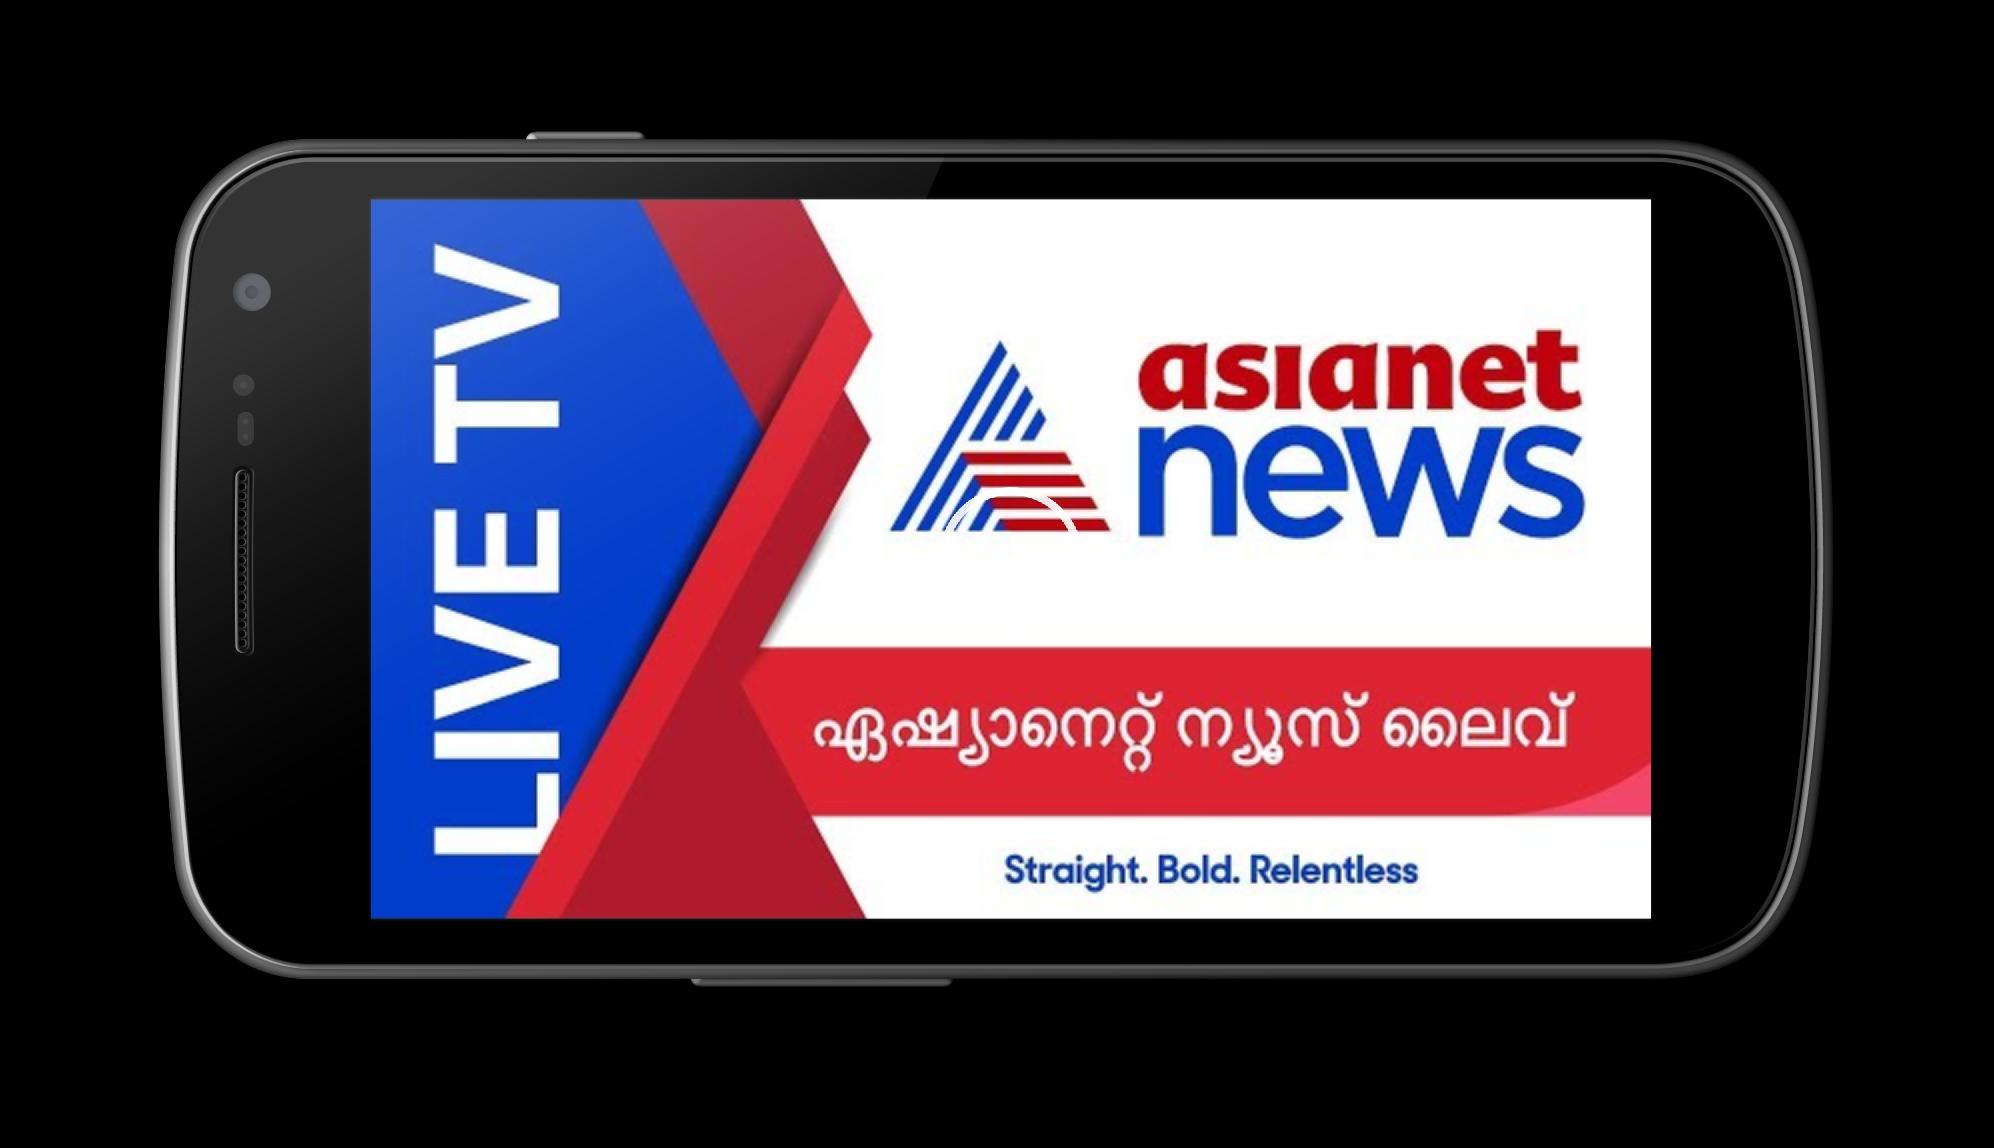 Asianet. Live News. TV Live poster. Asia net